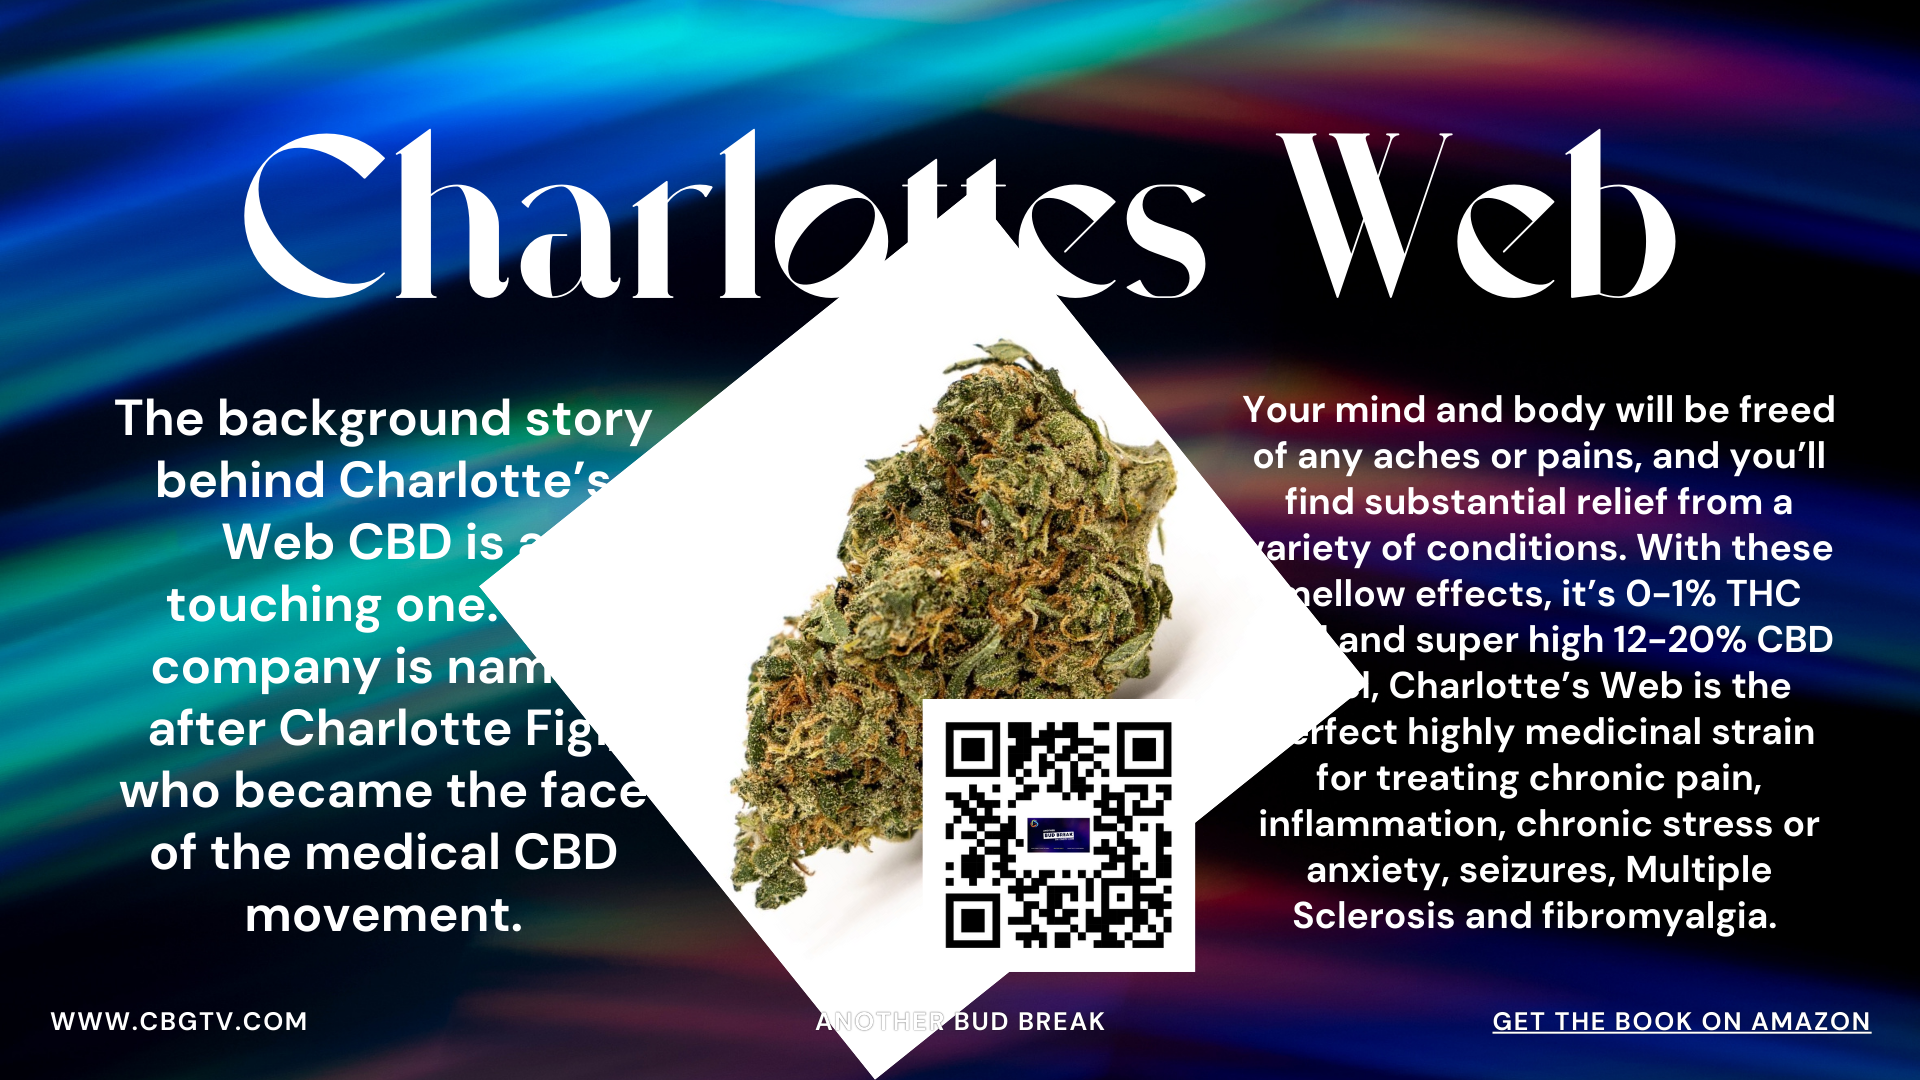 So, here's to Charlotte's Web, a strain that not only brings joy to the senses but also offers a pathway to wellness. Cheers to exploring the incredible world of cannabis, and don't forget to support CBGTV in their mission to educate and entertain cannabis enthusiasts worldwide!